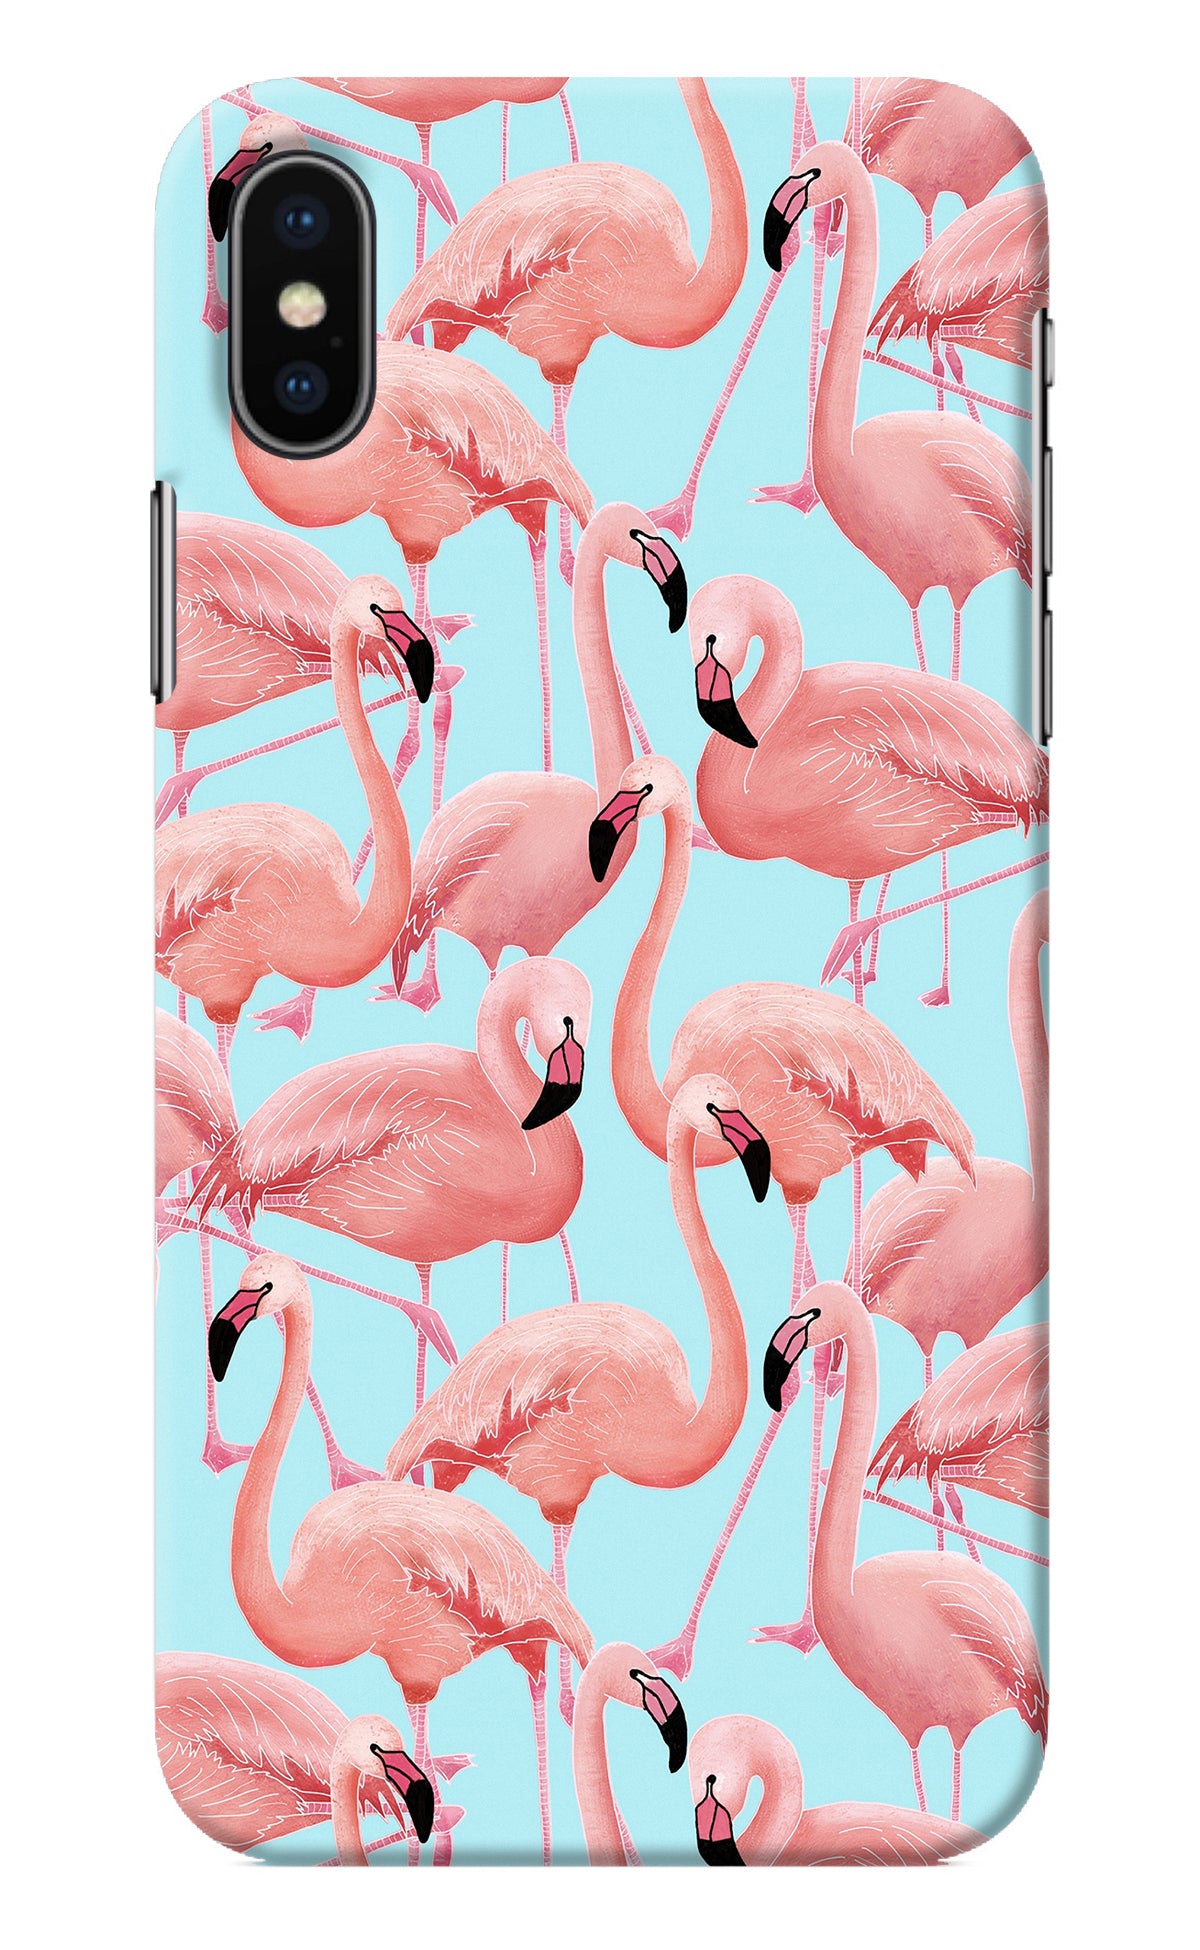 Flamboyance iPhone X Back Cover